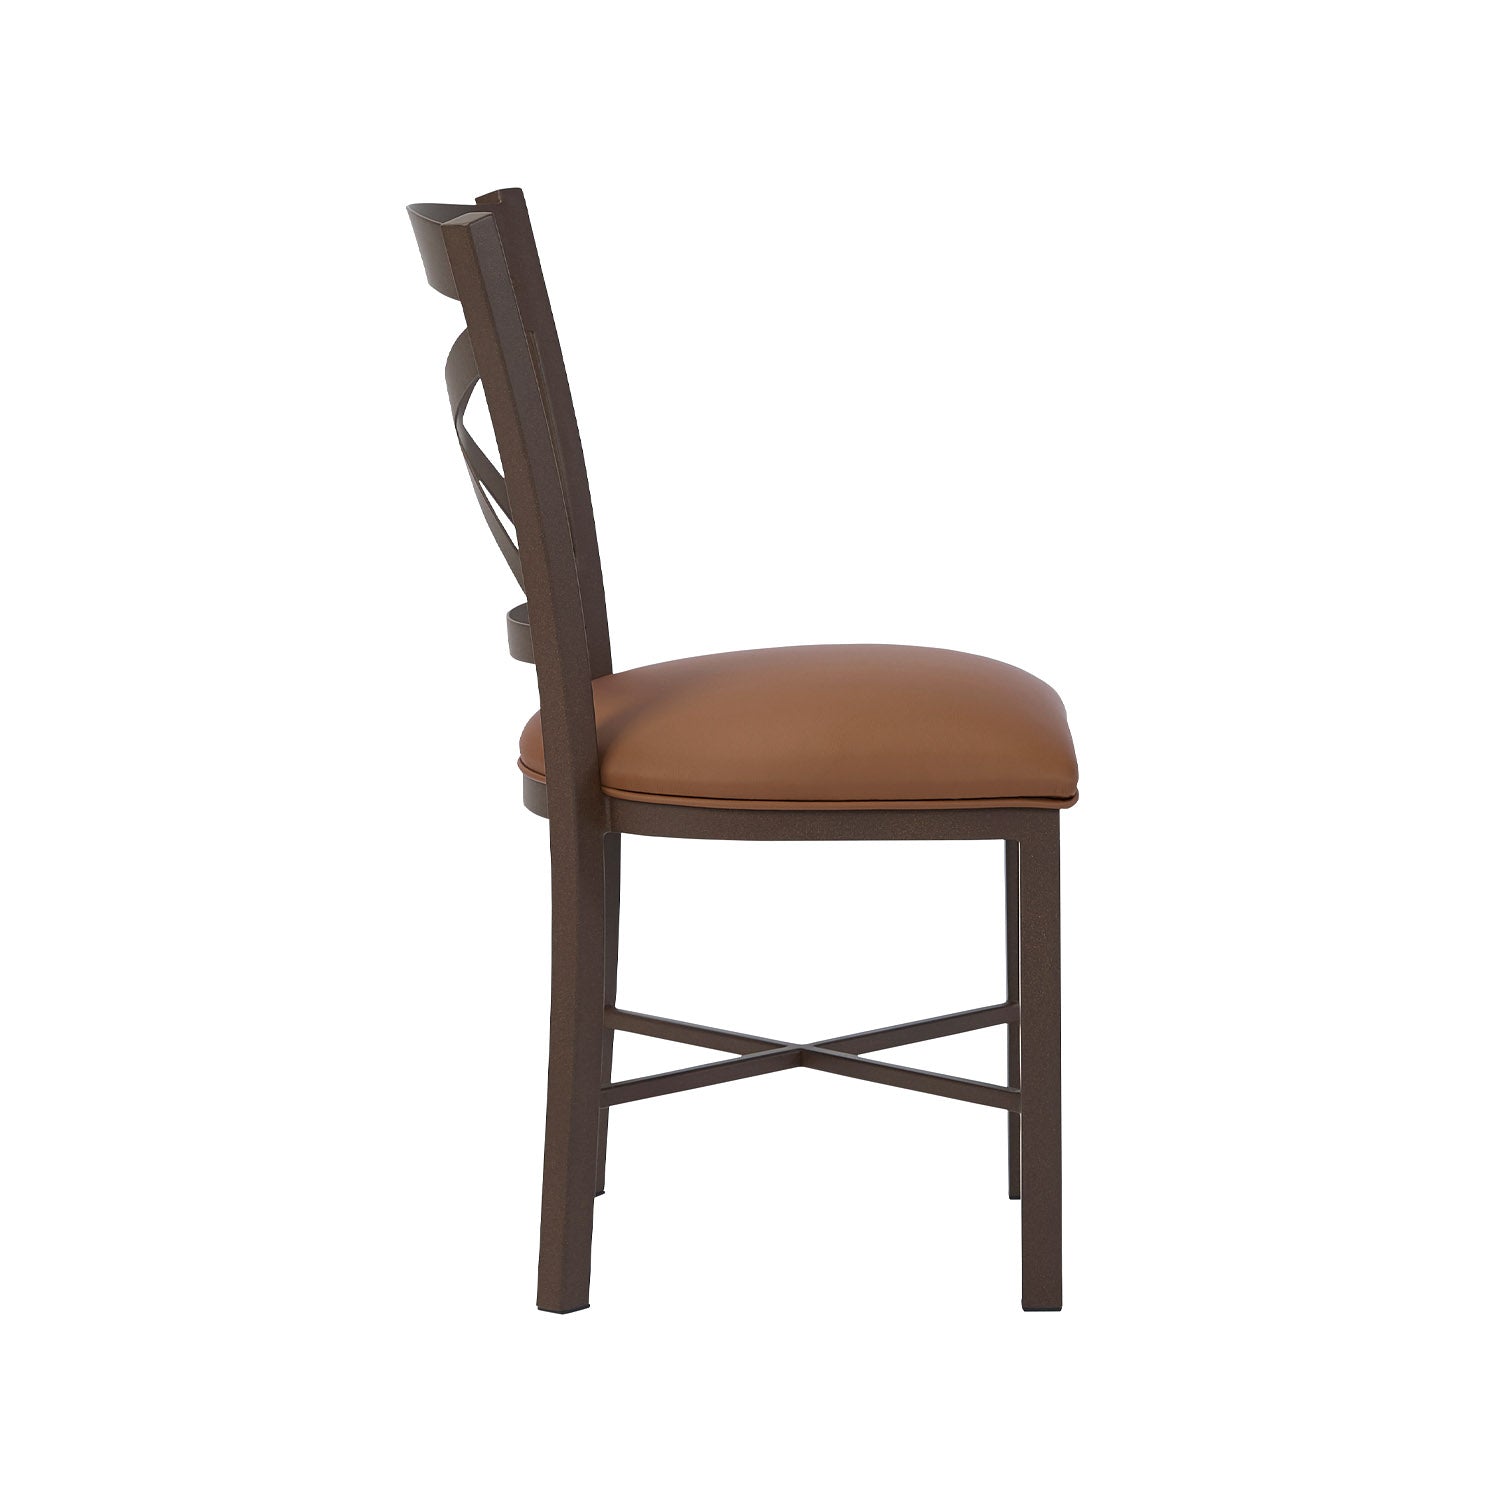 Wesley Allen Edmonton Chair in Dillon Luggage Vinyl and Speckled Oak Finish. Side View.